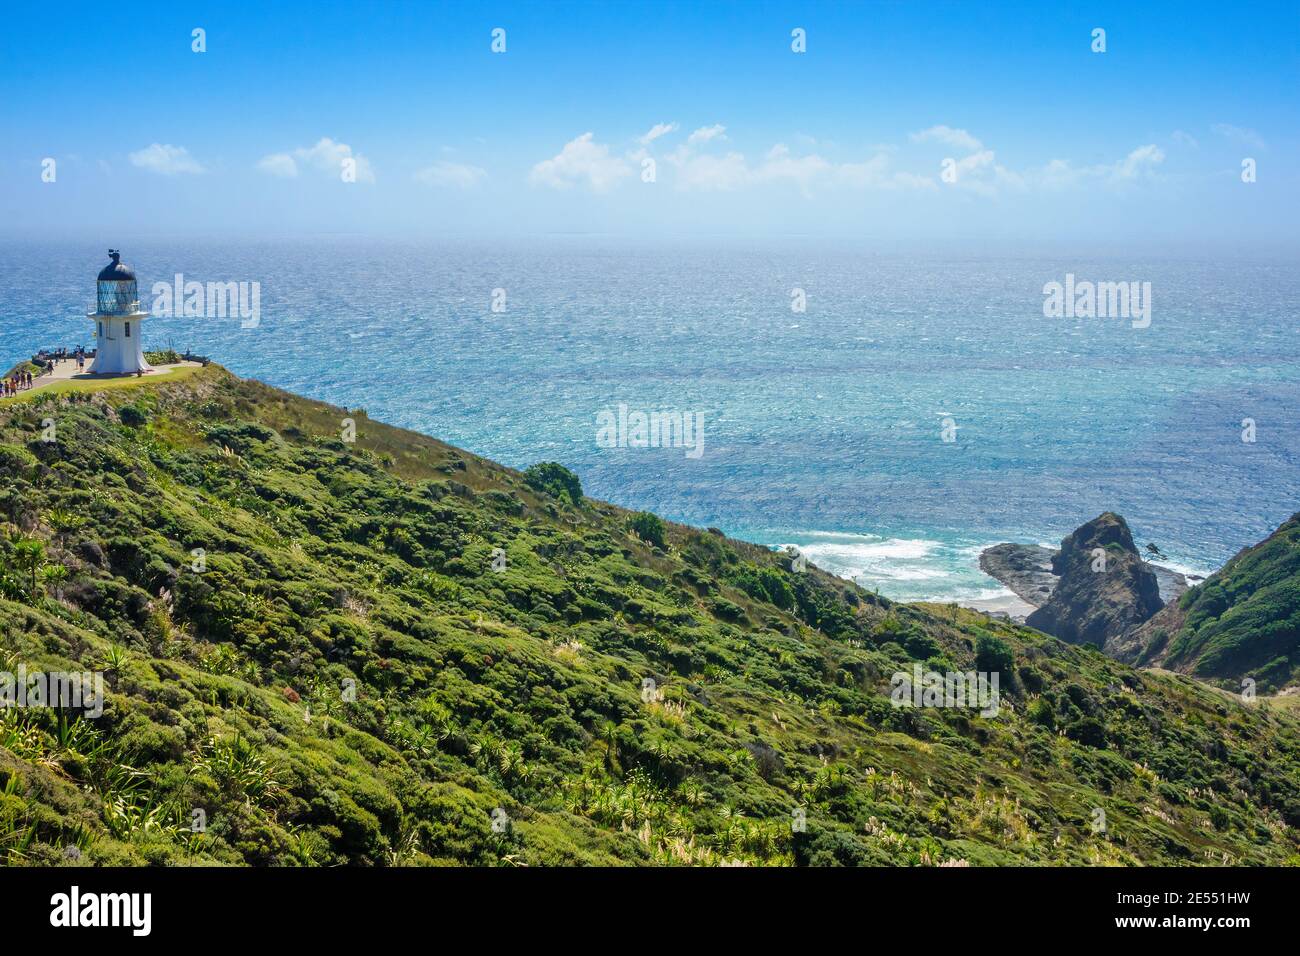 View of the Cape Reinga lighthouse, Northland, North Island, New Zealand Stock Photo